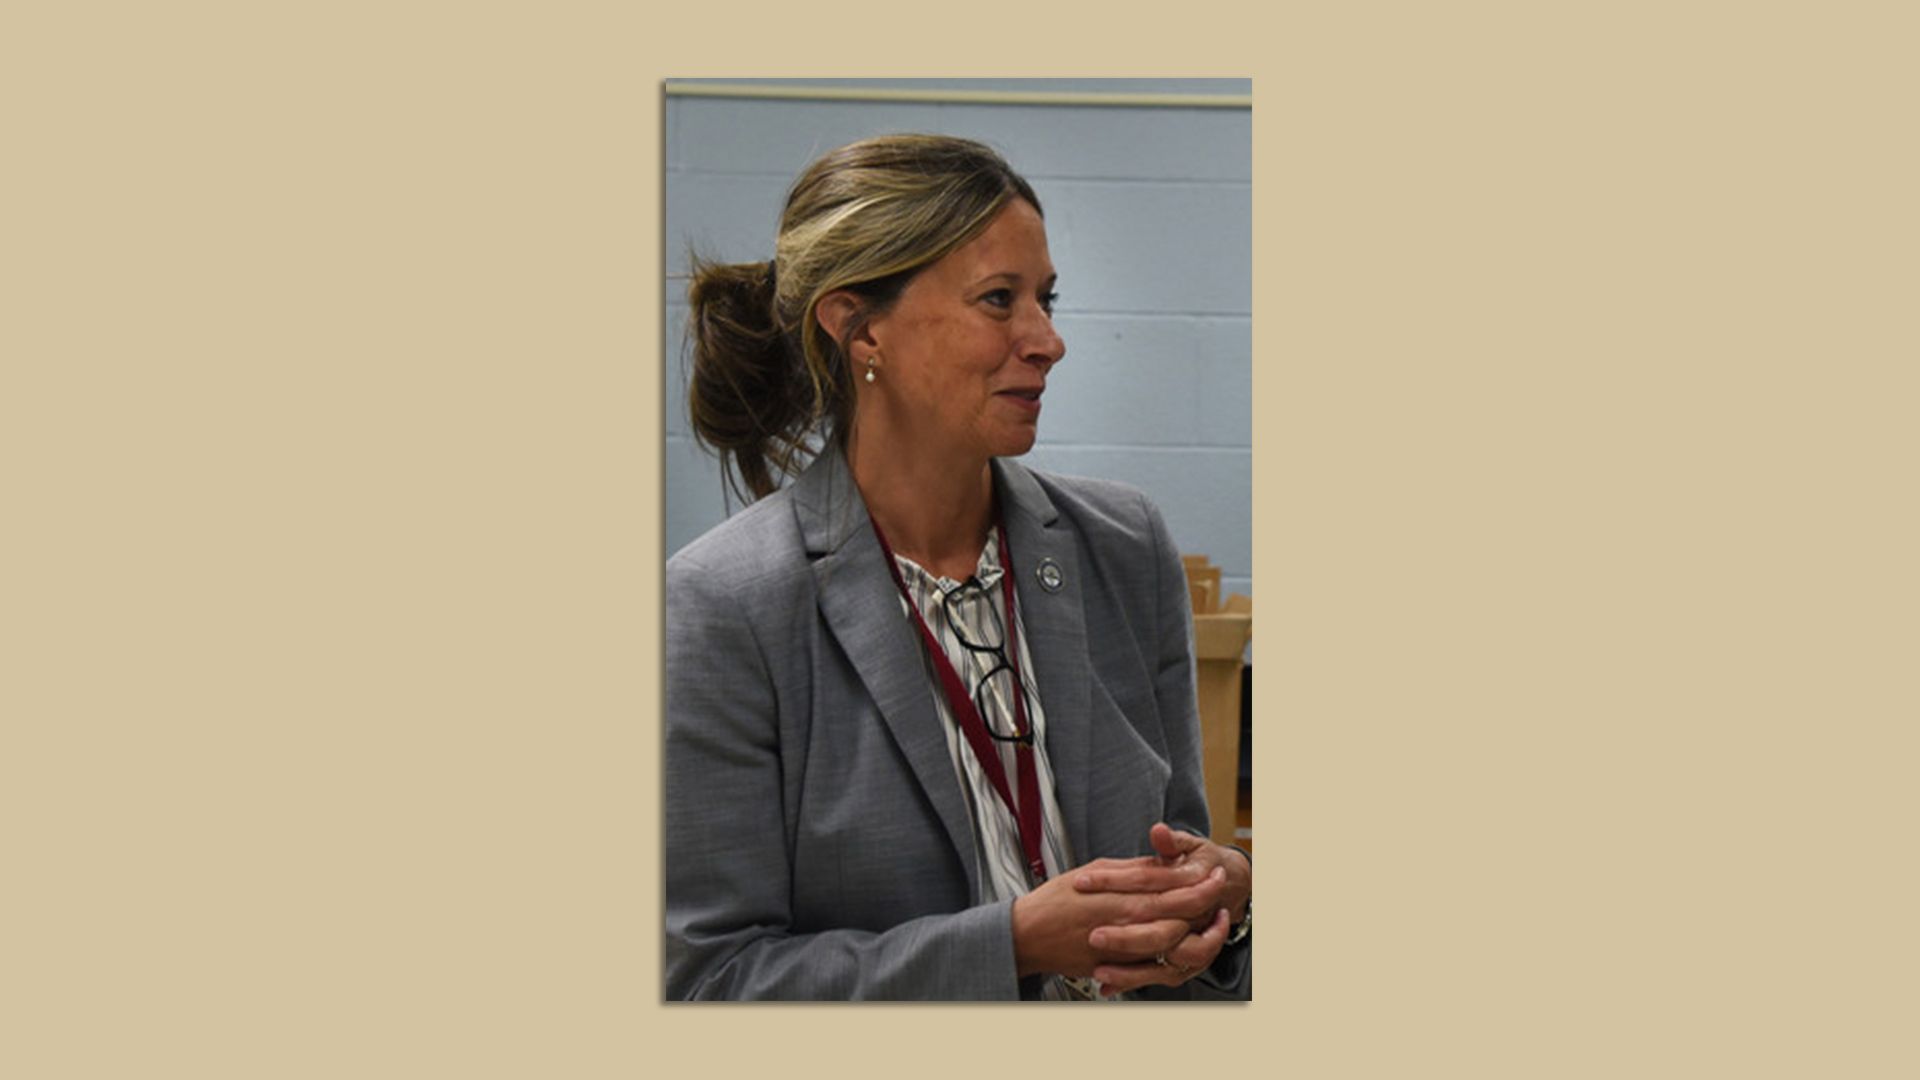 Dr. Amy Acton is seen in a handout photo.